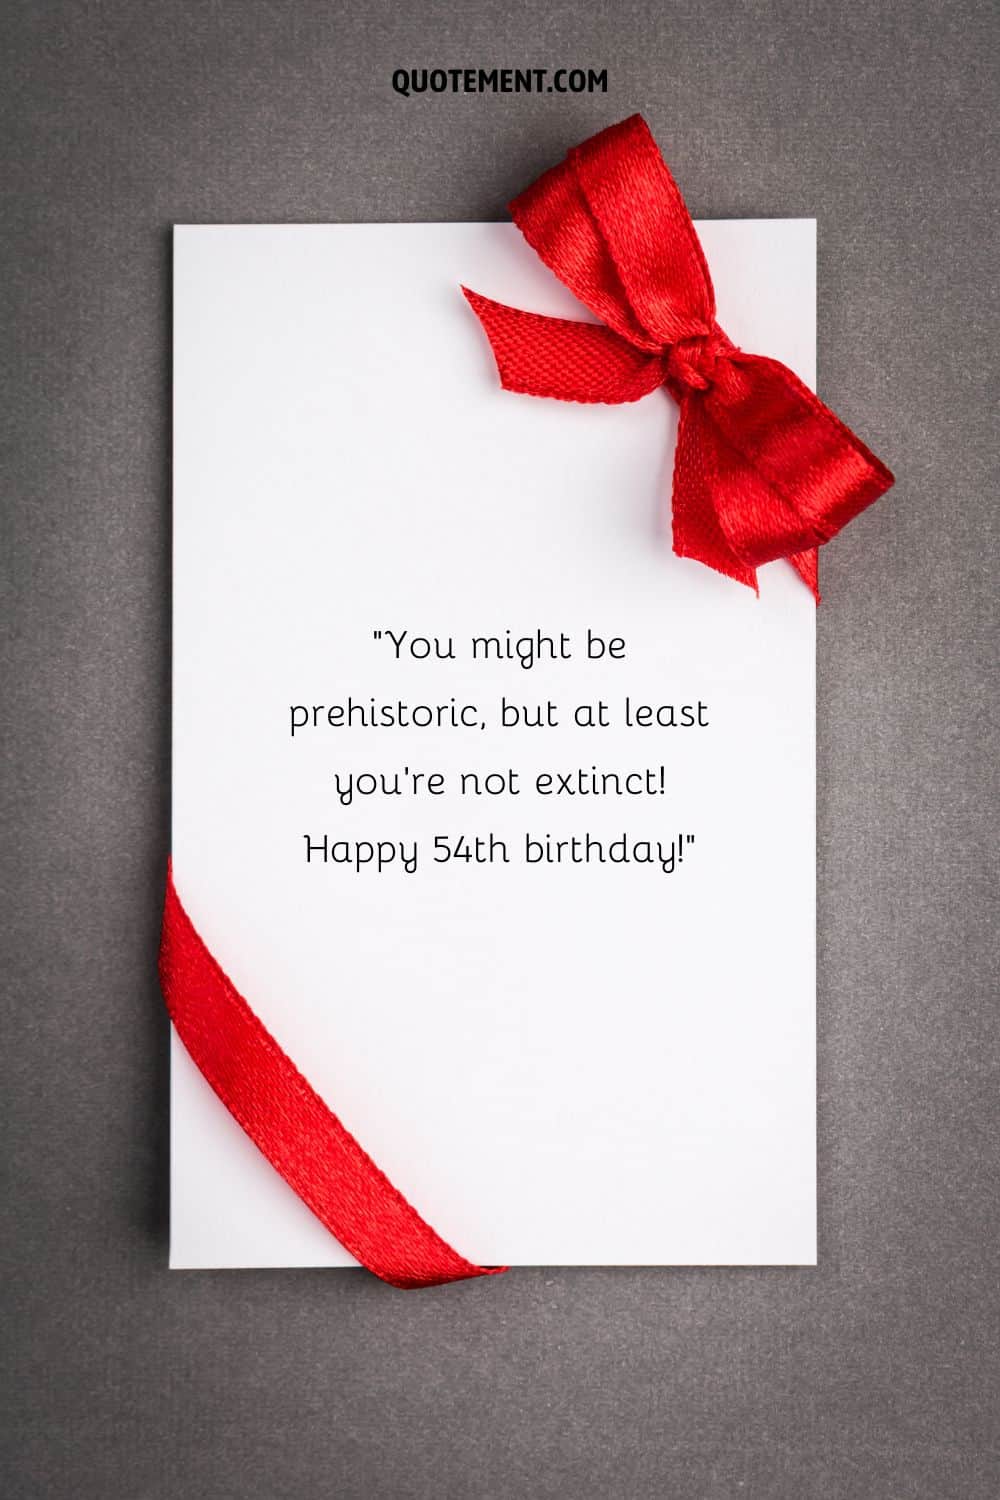 Funny message for their 54th birthday on a white birthday card with a red ribbon
